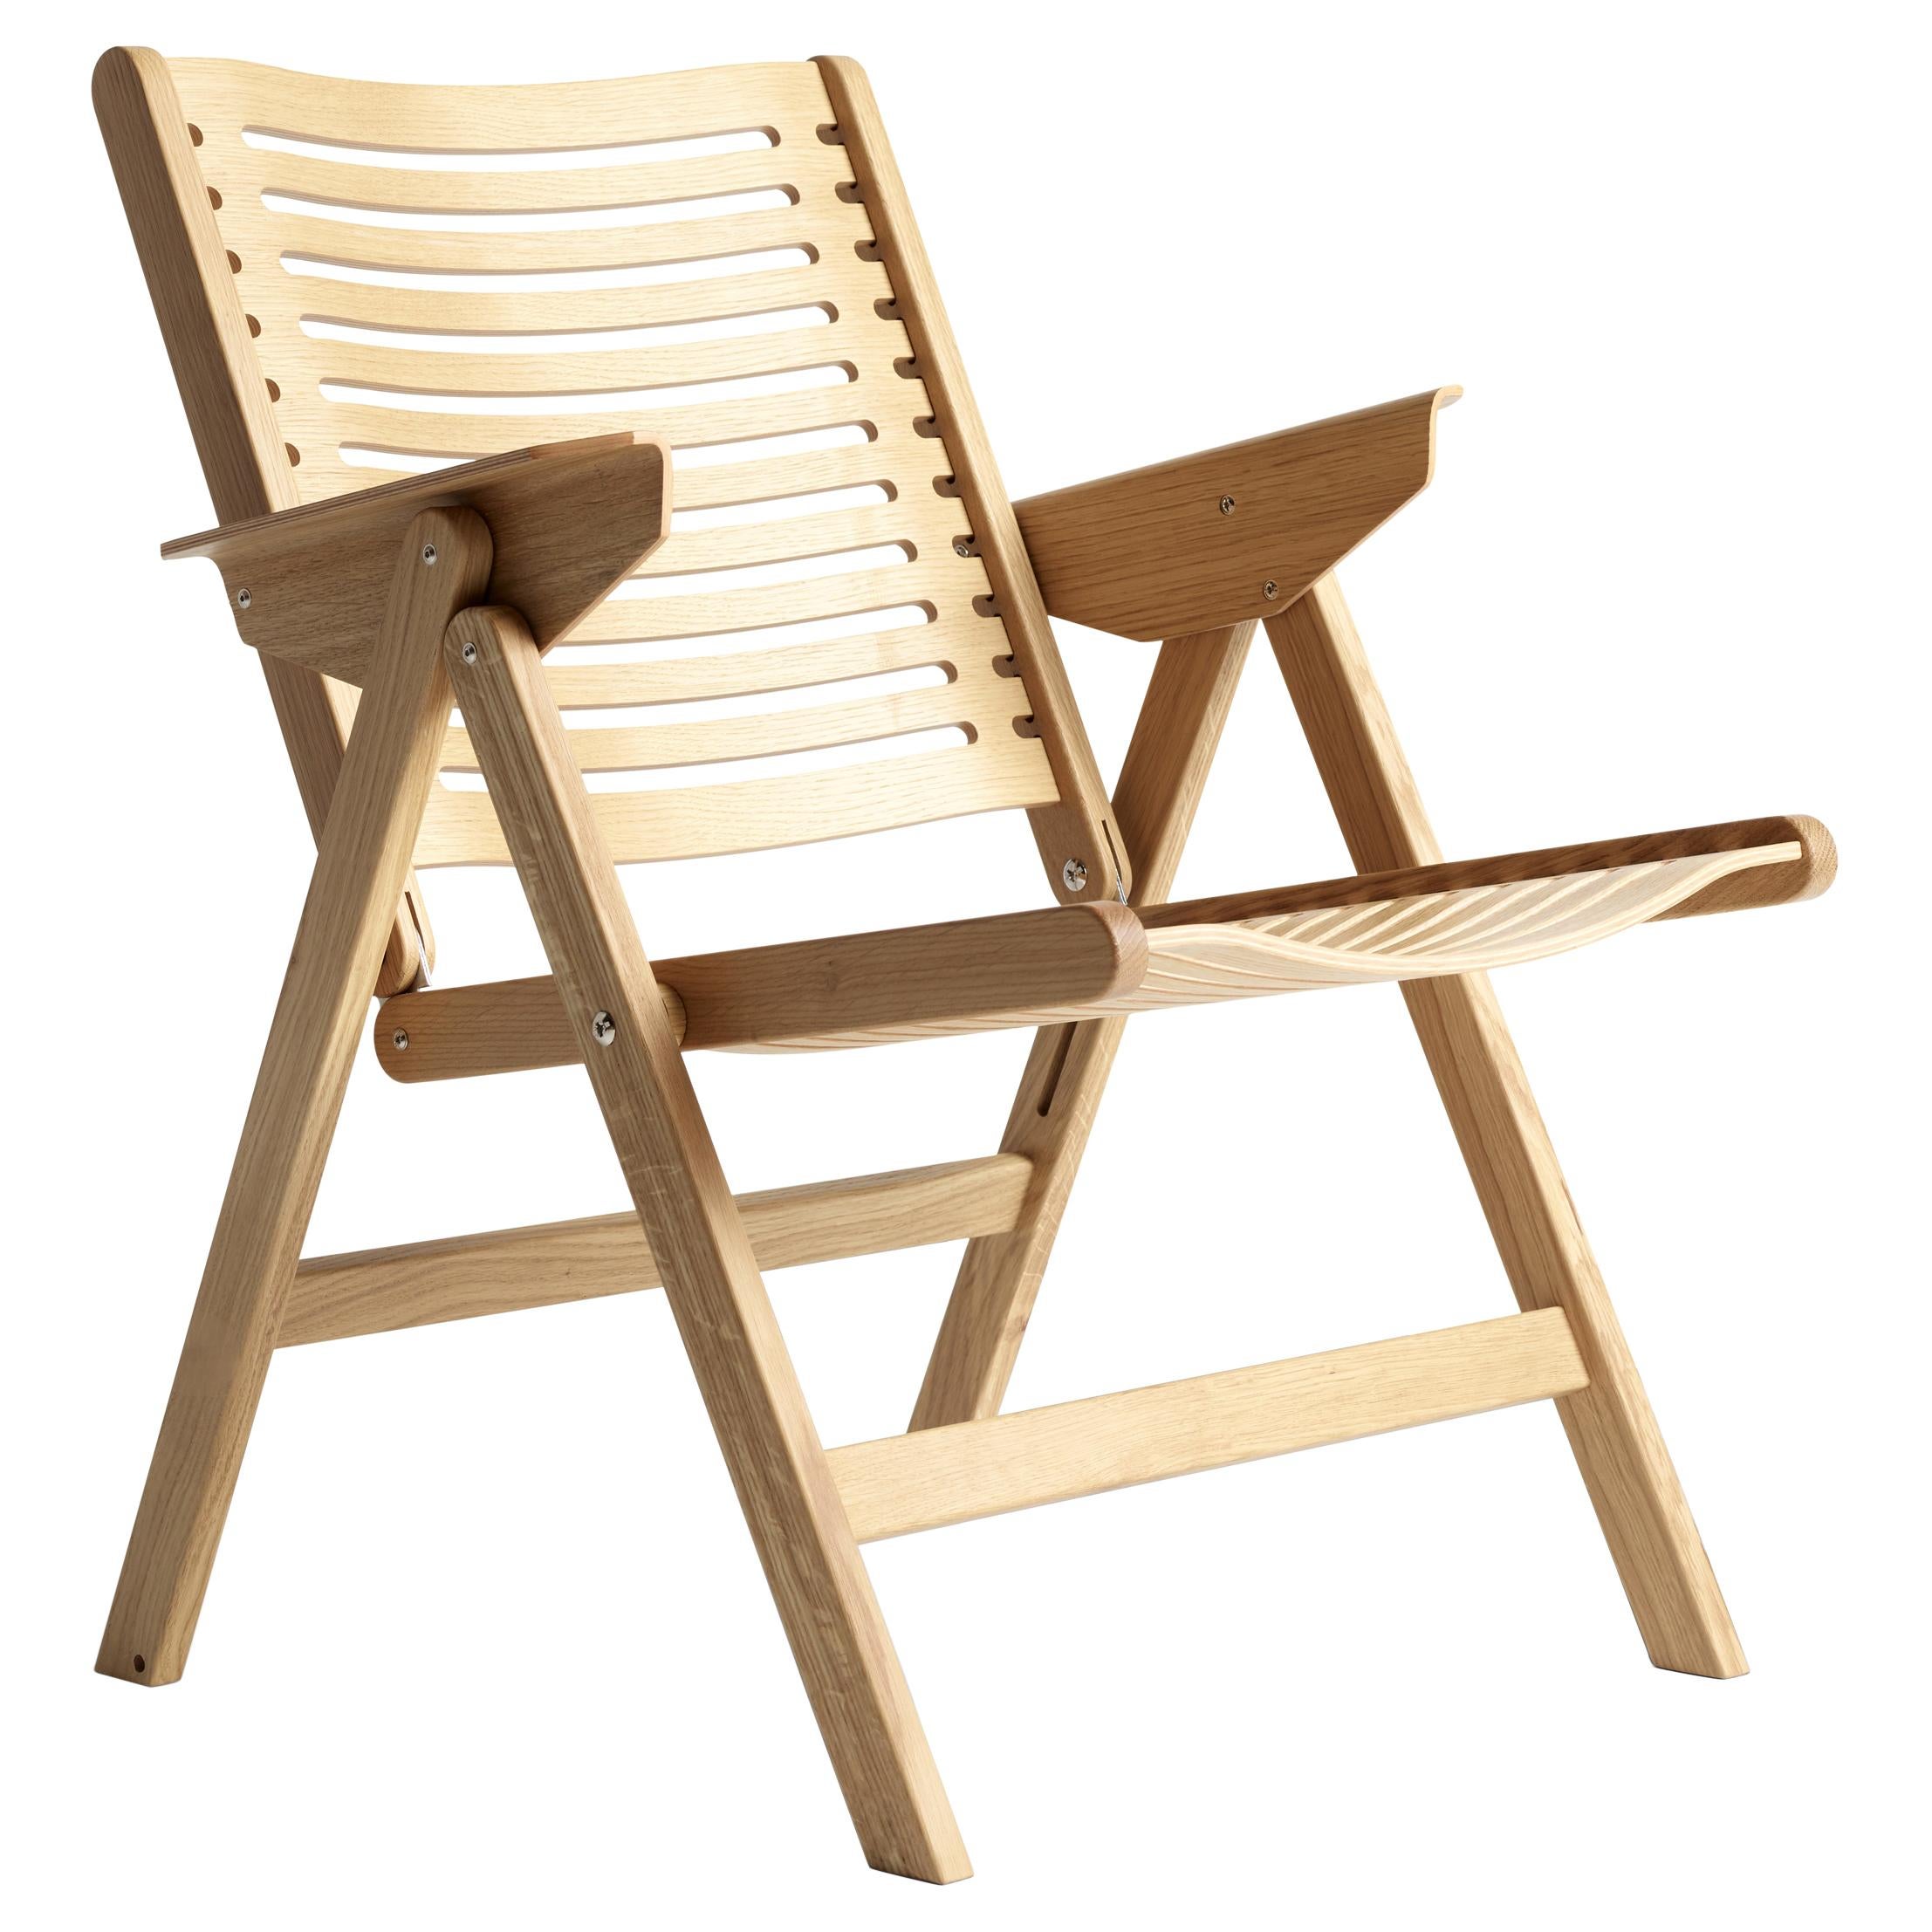 Rex Lounge Chair in Natural Oak, Solid Frame + Plywood, Mid-Century Modern Style